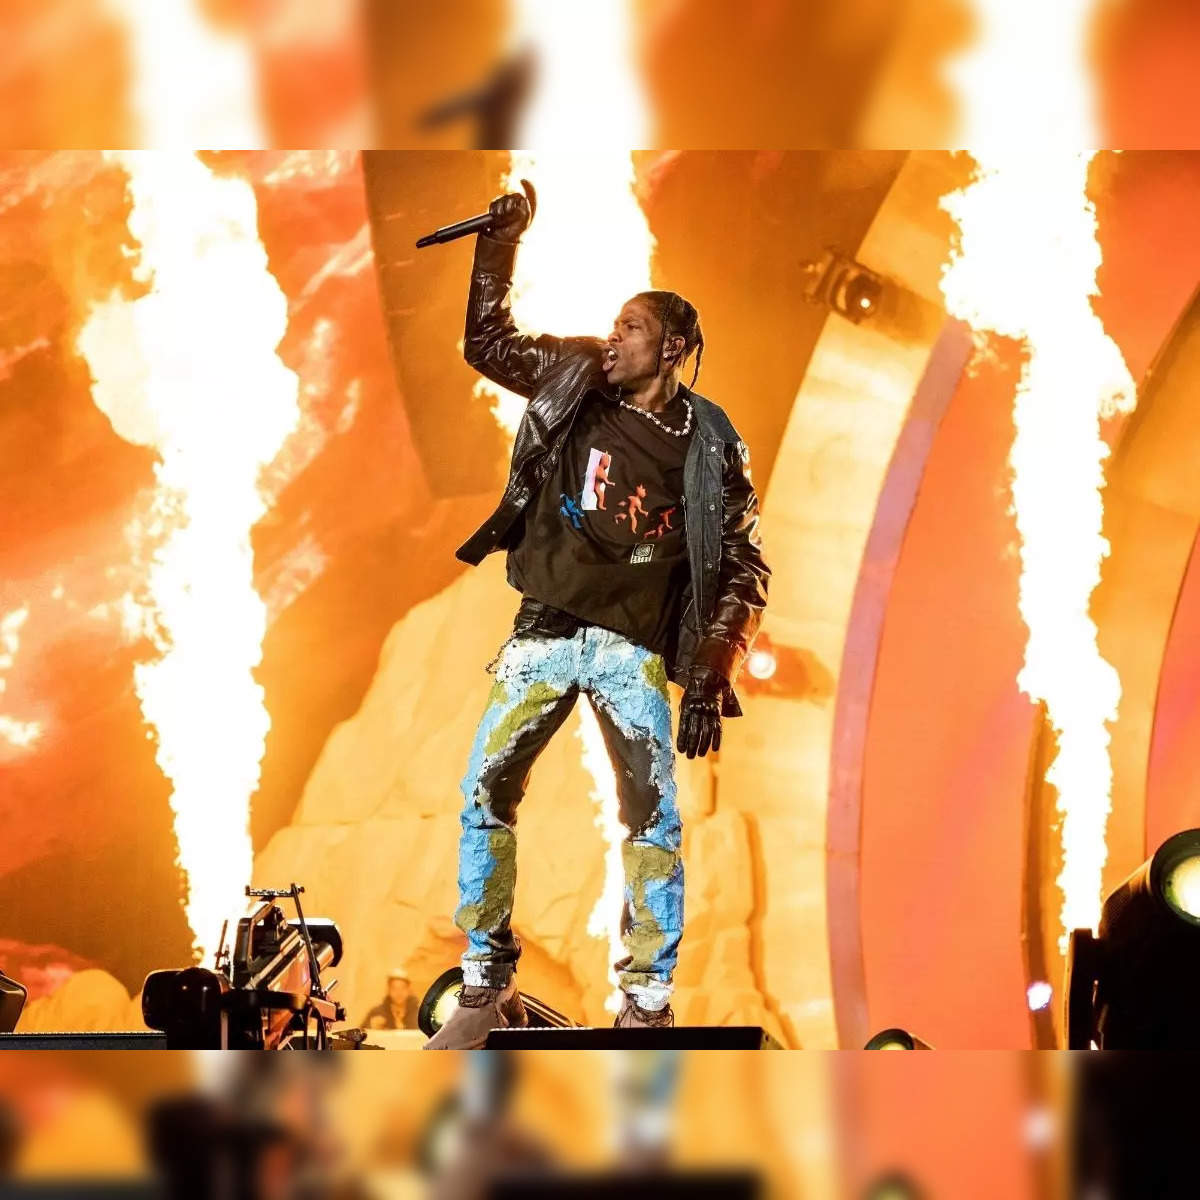 Travis Scott Concert Update: 'Crowd pleaded for help, ambulance was stuck.'  What happened at Travis Scott's concert that killed 8 people including a  14-year-old - The Economic Times